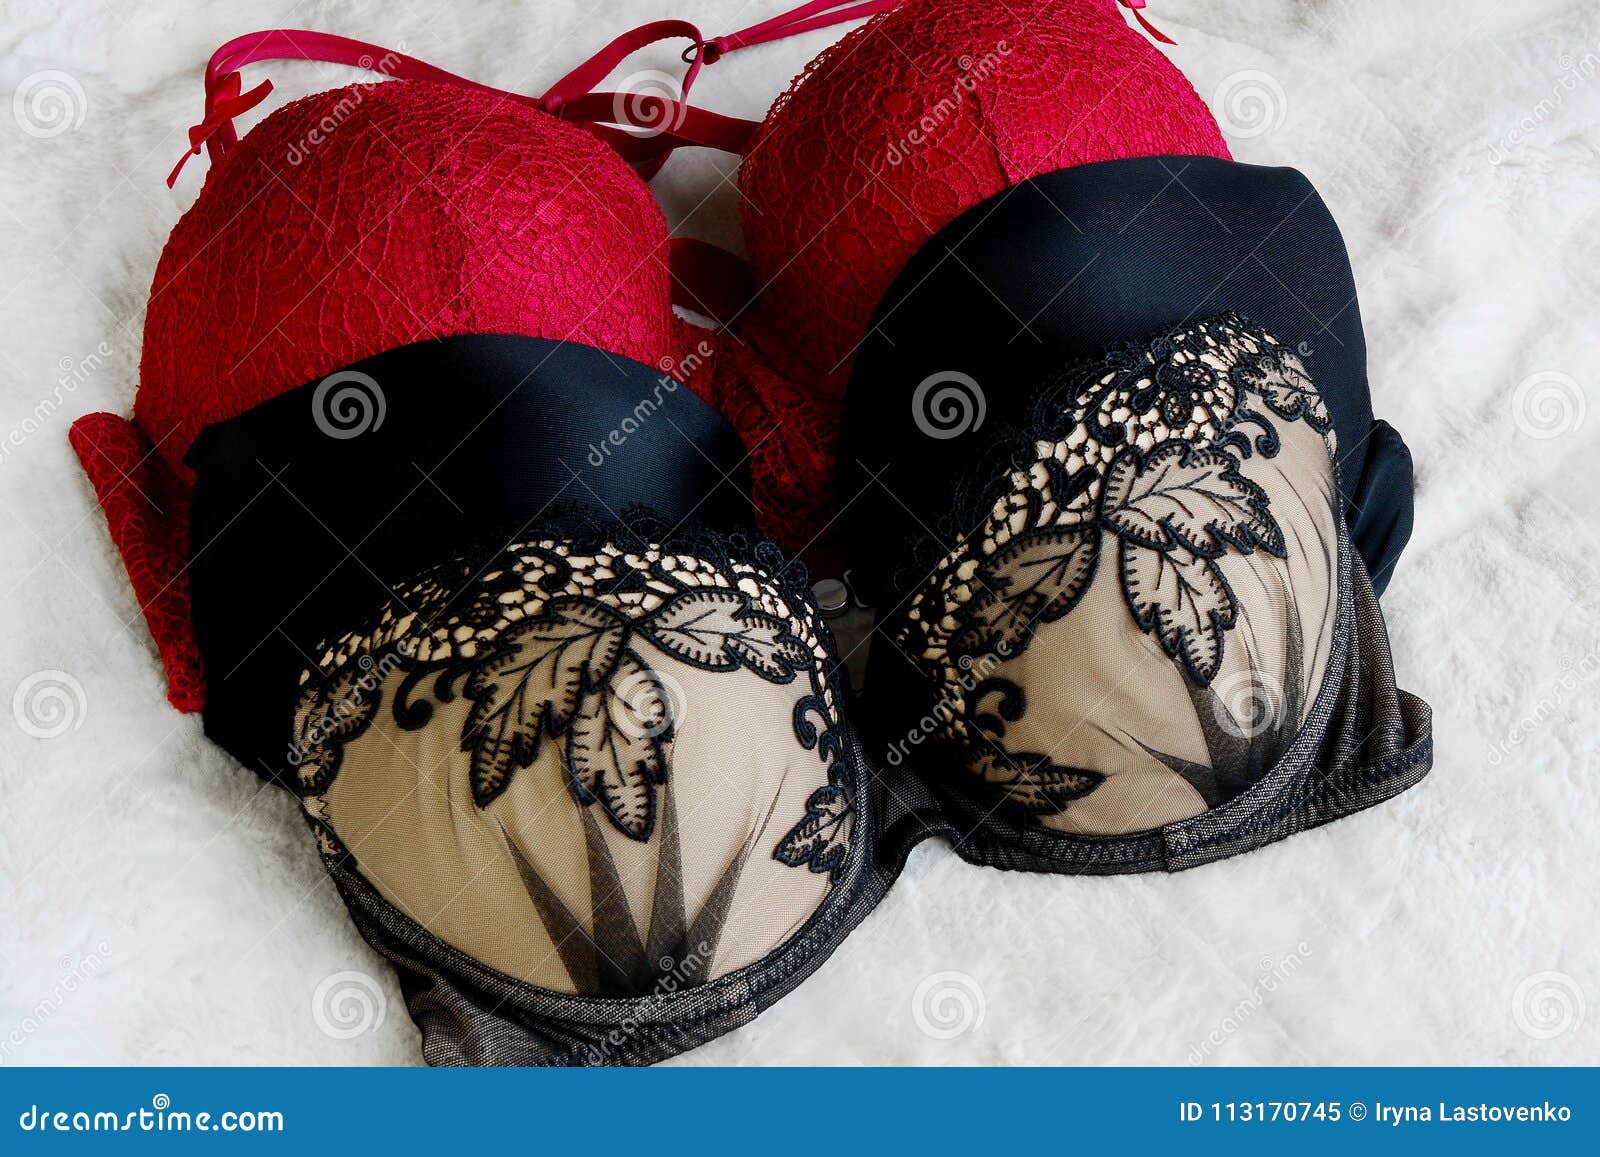 Women`s Lace Underwear of Red and Black Color, Bra. Stock Image - Image of  fashion, girl: 113170745